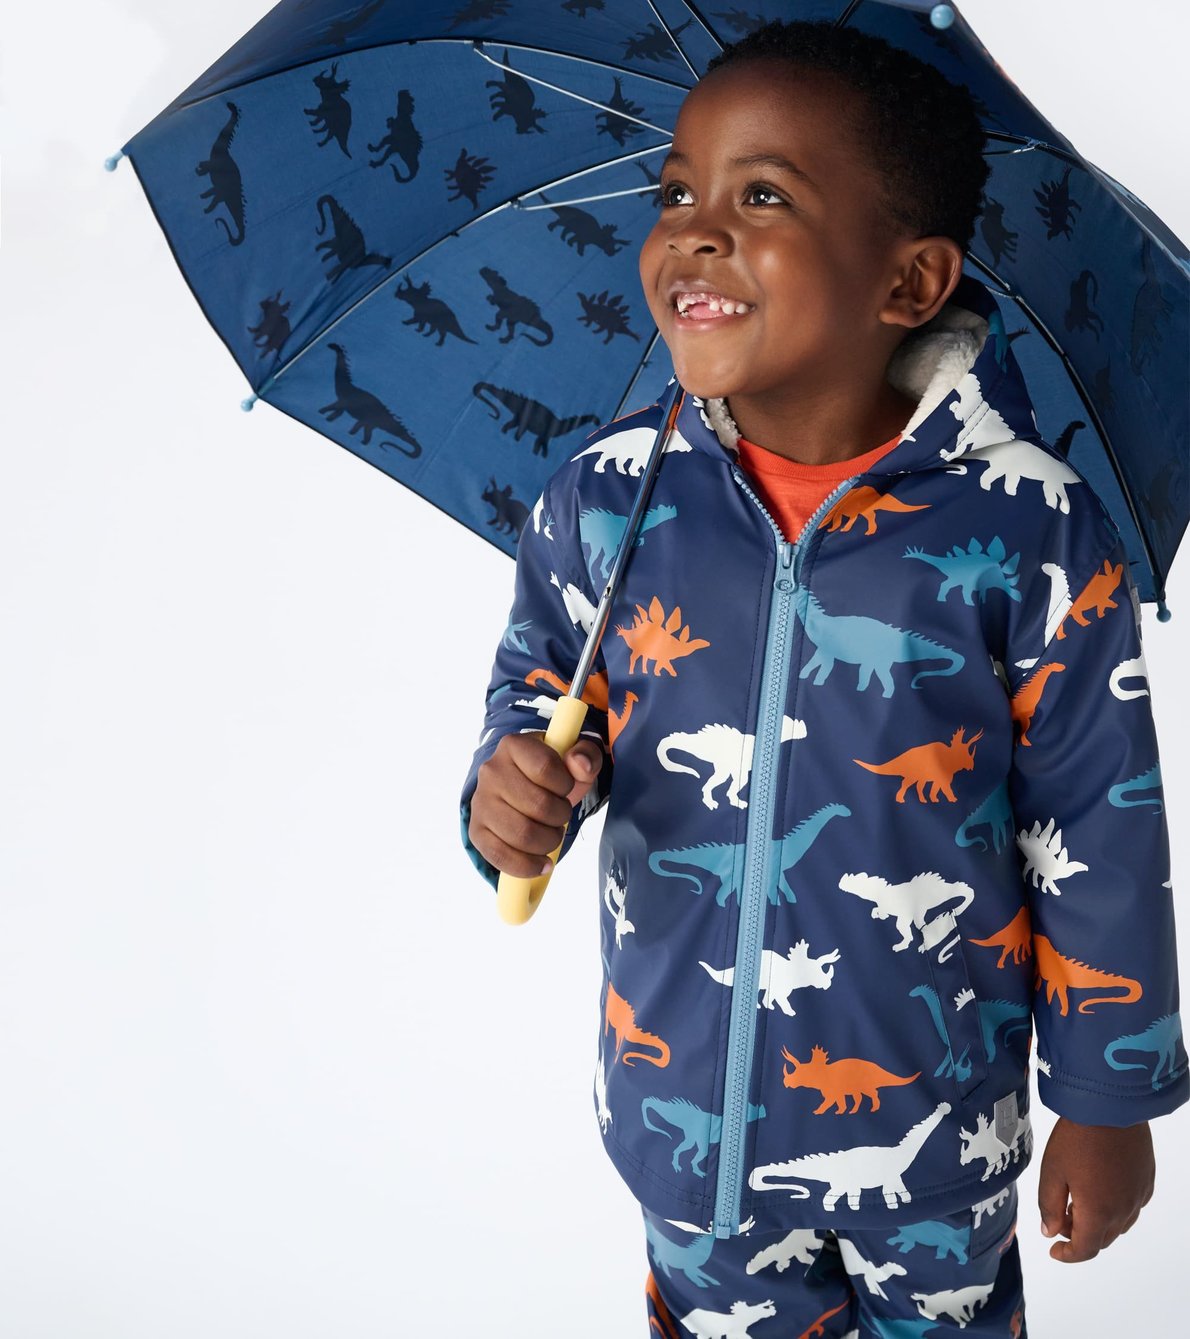 View larger image of Dinosaur Silhouettes Colour Changing Kids Raincoat